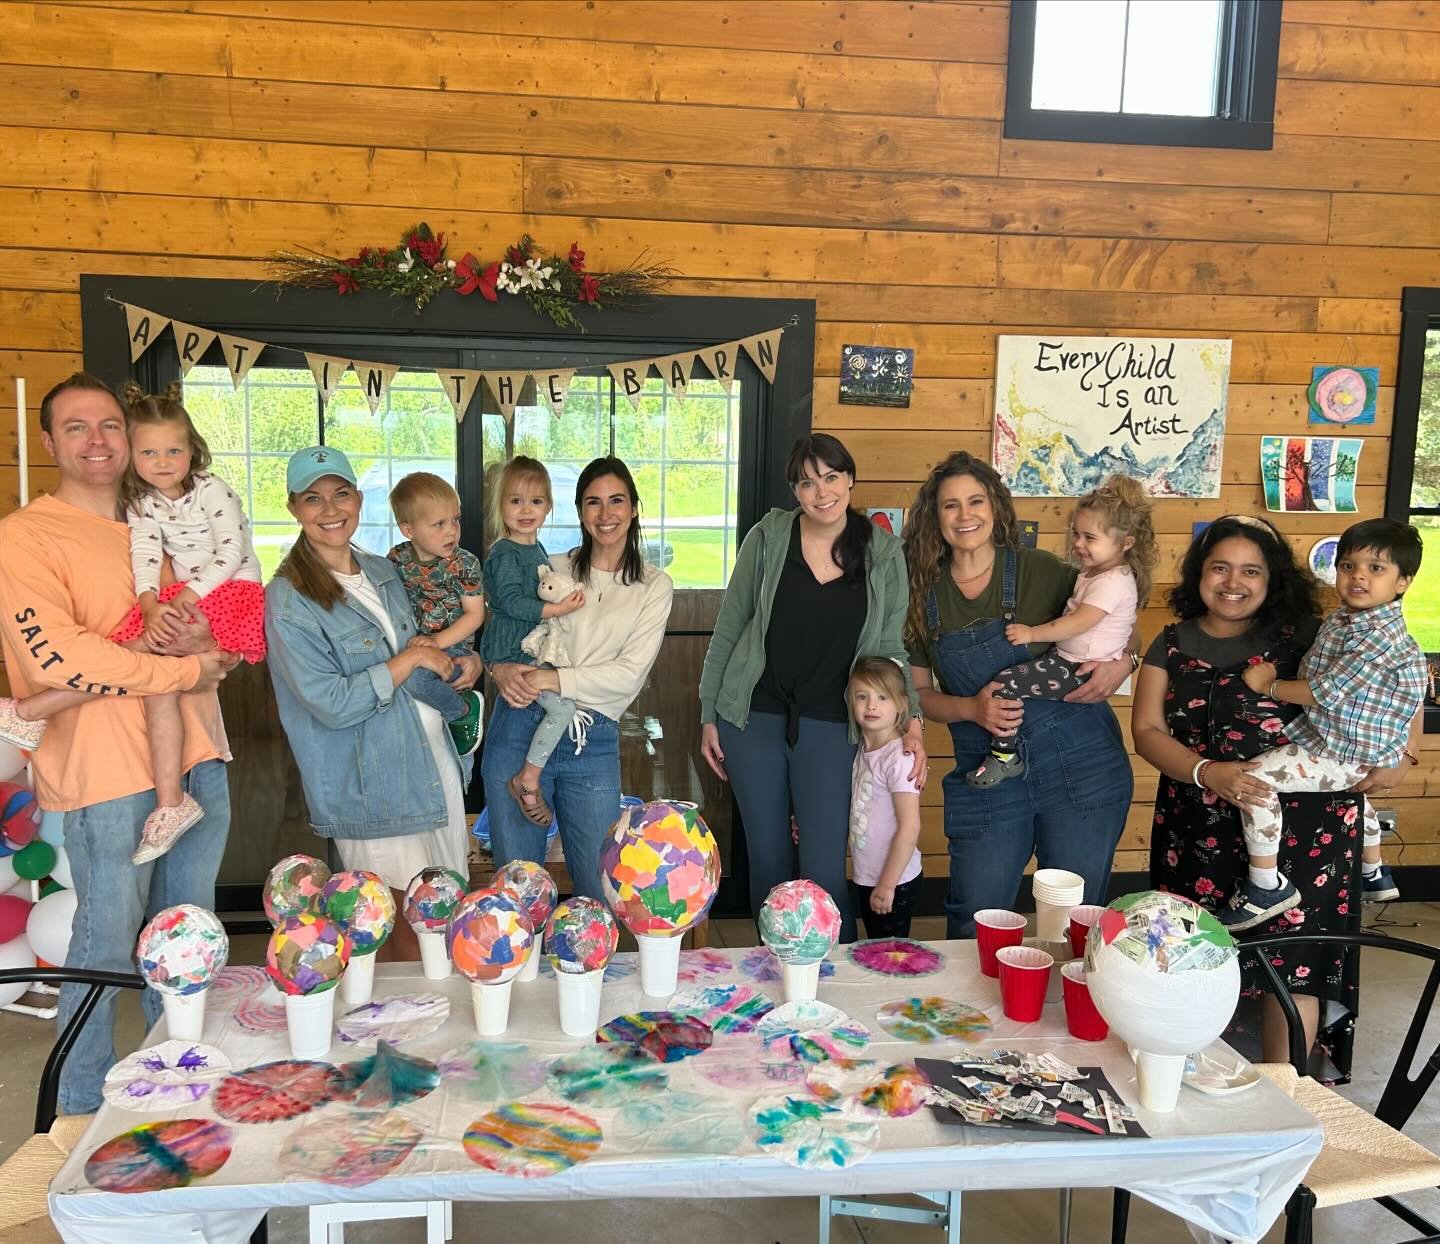 Last weekend our littlest artists made some beautiful centerpieces at @artinthebarn_barrington for our upcoming senior event! 🎨